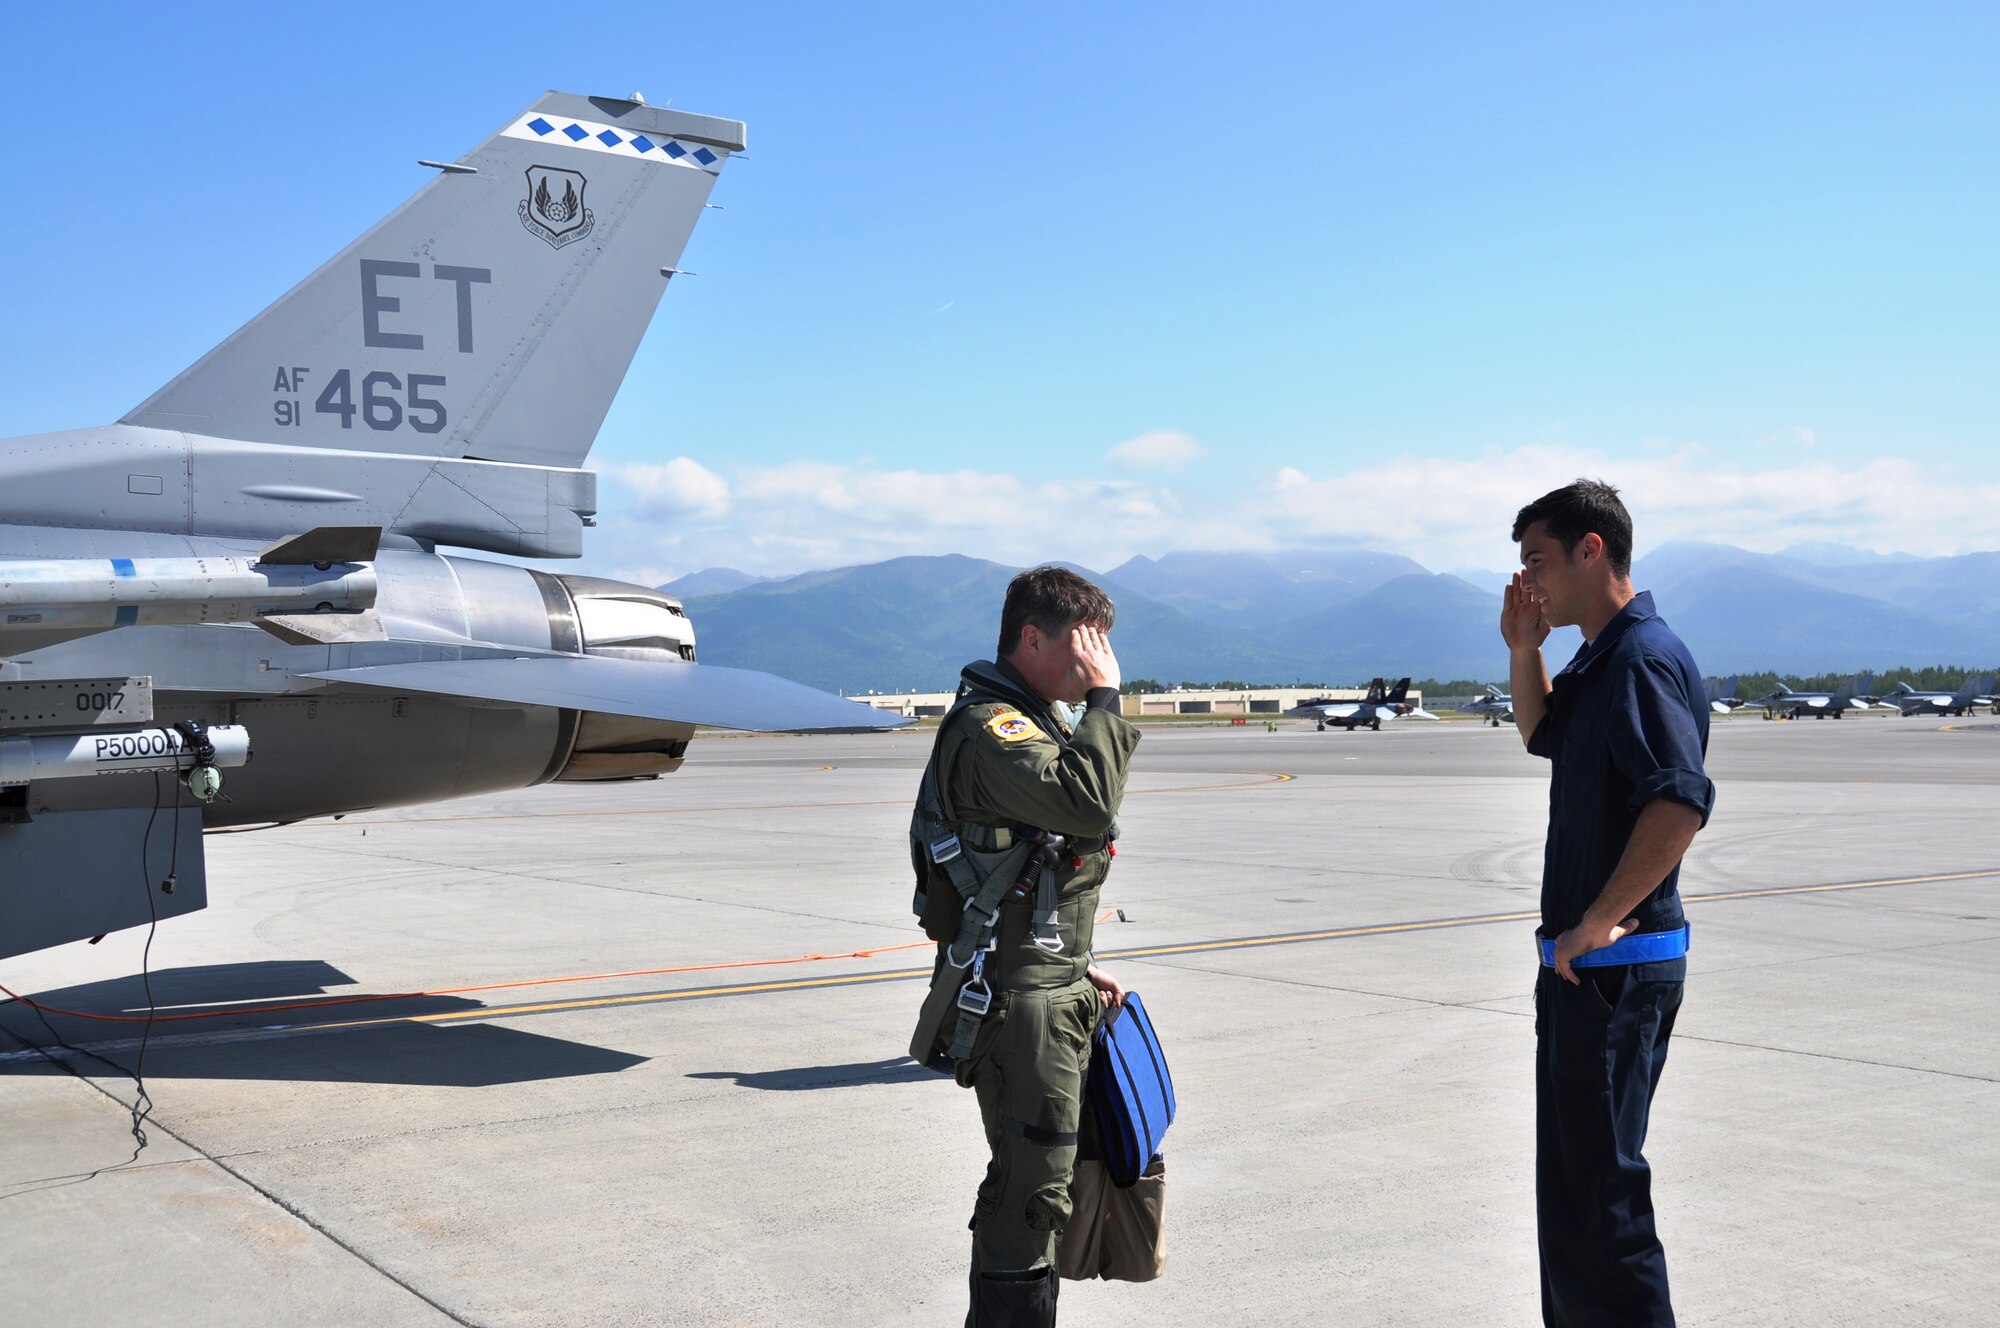 U.S. Air Force Maj Grizz Baer, 53rd Wing F-16 pilot from Wolcott, Indiana, greets Senior Airman Jeremy Fogle, 96th Aircraft Maintenance Squadron F-16 crew chief from Nazareth, Pennsylvania, prior to conducting pre-flight checks for an Exercise Northern Edge mission, June 23, 2015, Joint Base Elmendorf-Richardson, Alaska. Northern Edge is Alaska’s premier joint training exercise designed to practice operations, techniques and procedures as well as enhance interoperability among the services. Thousands of service members from active duty, Reserve and National Guard units are involved. (U.S. Air Force photo by Capt. Tania Bryan/Released)